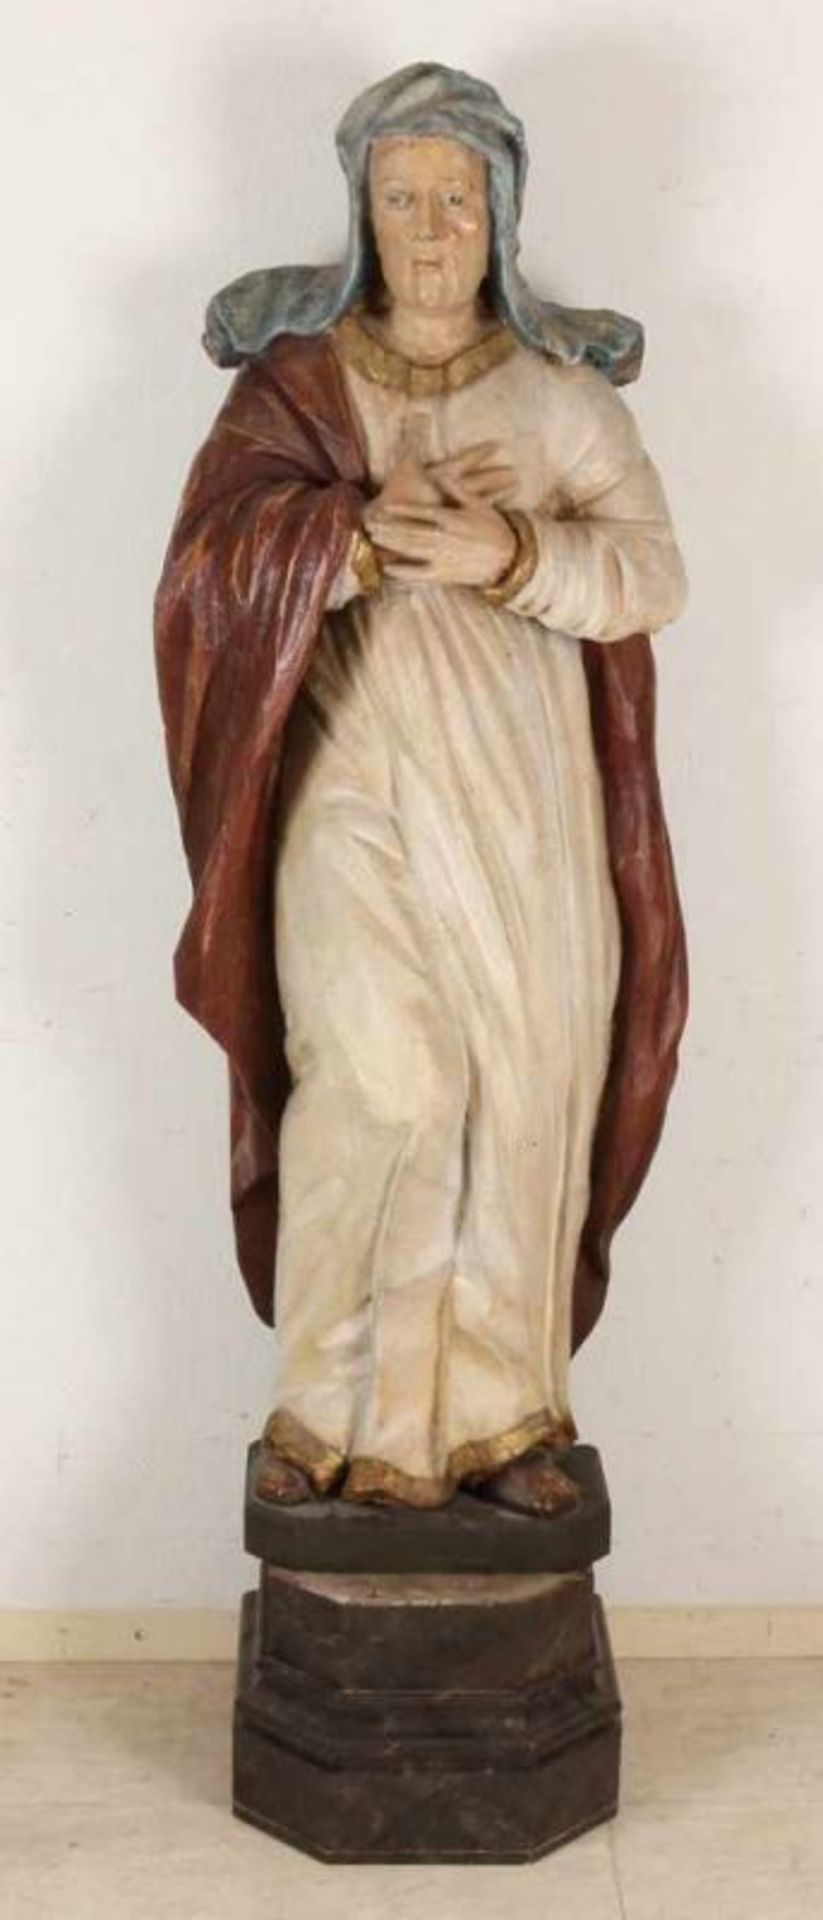 Very large 18th century church wood inserted figure console with polychrome. Partially restored.